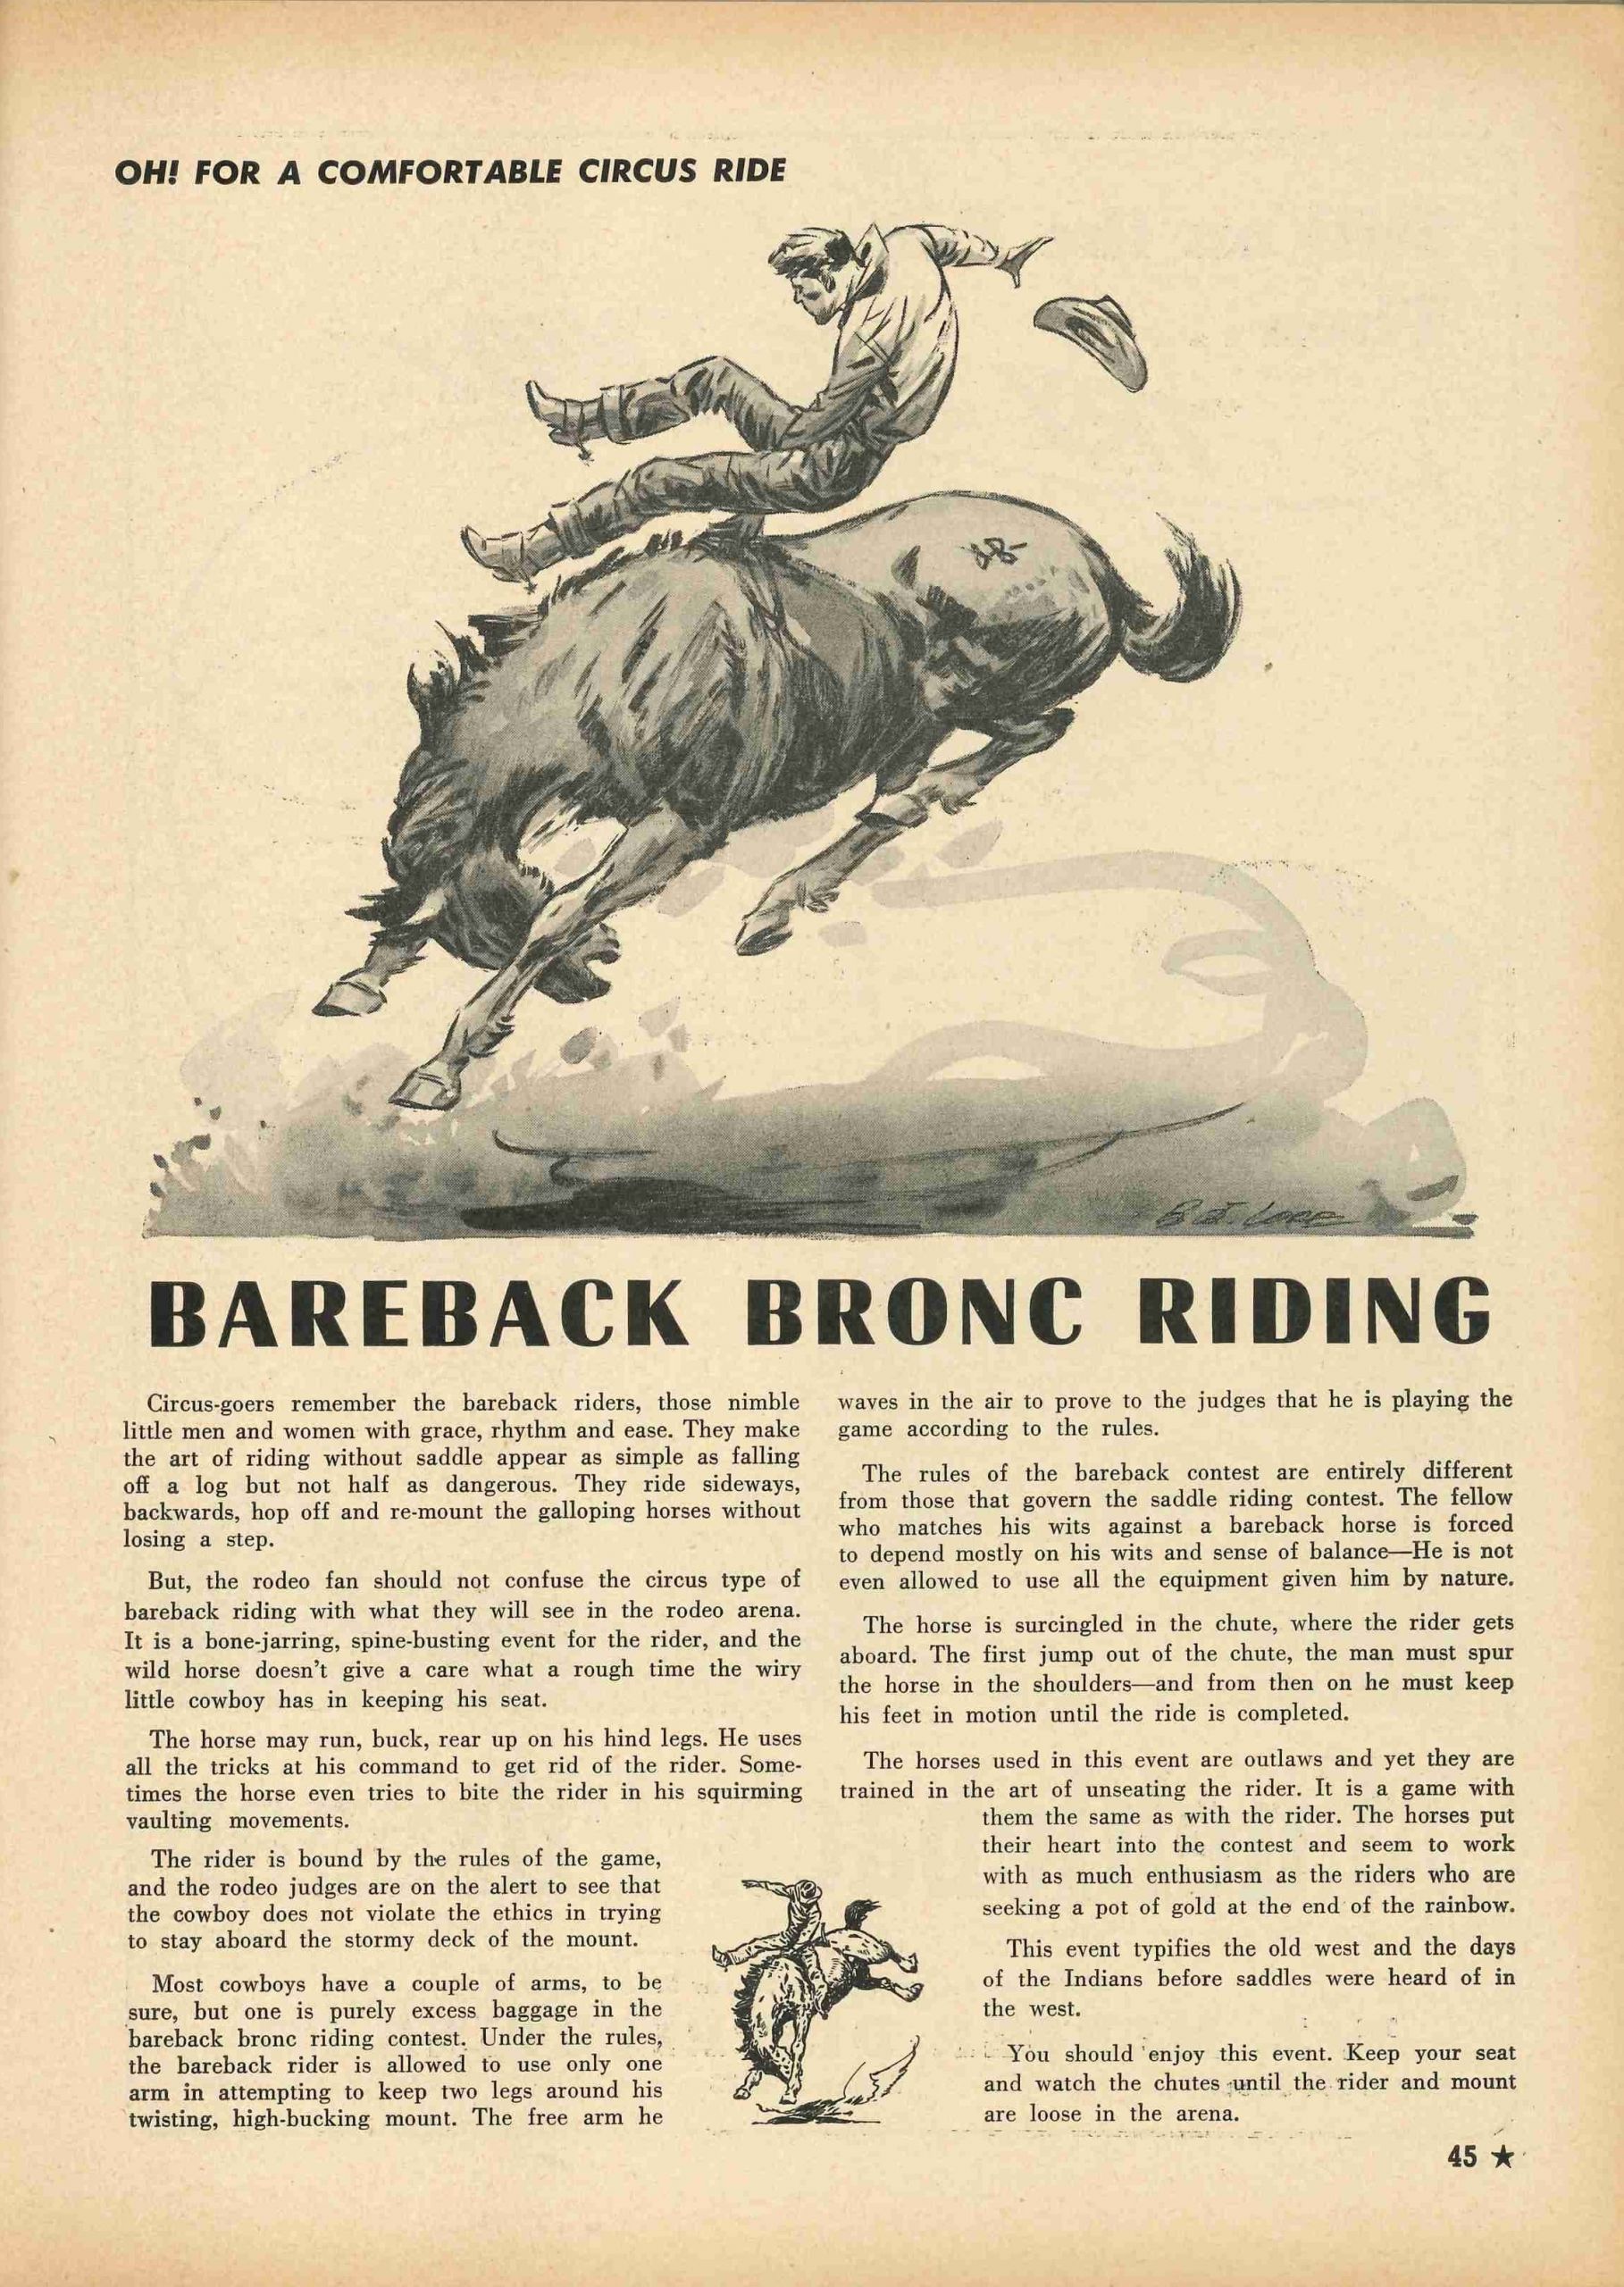 Page from stock show annual with essay describing bareback bronc riding